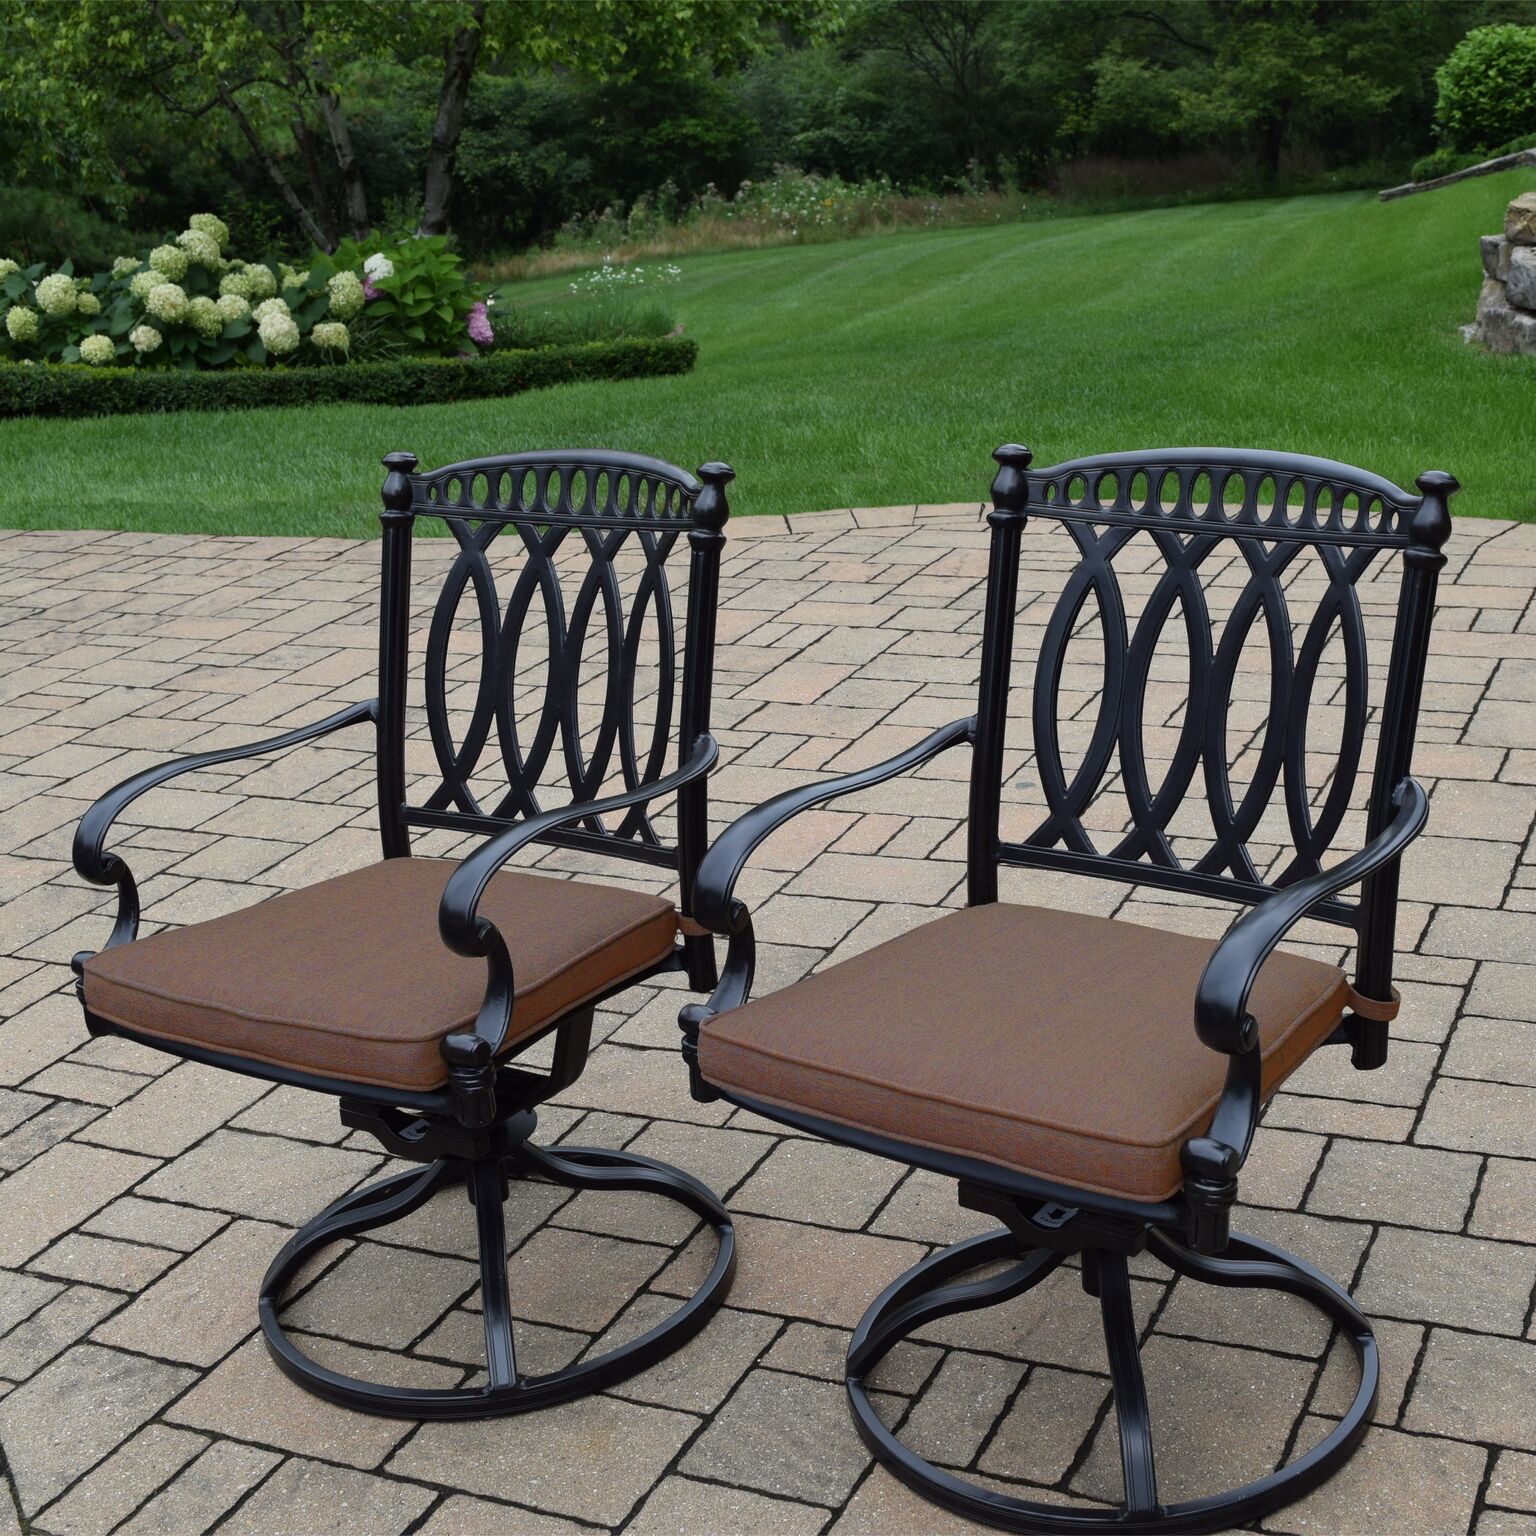 Outdoor Living and Style Set of 2 Black Swivel Rocker Outdoor Patio Chairs - Tan Brown Cushions - image 1 of 1